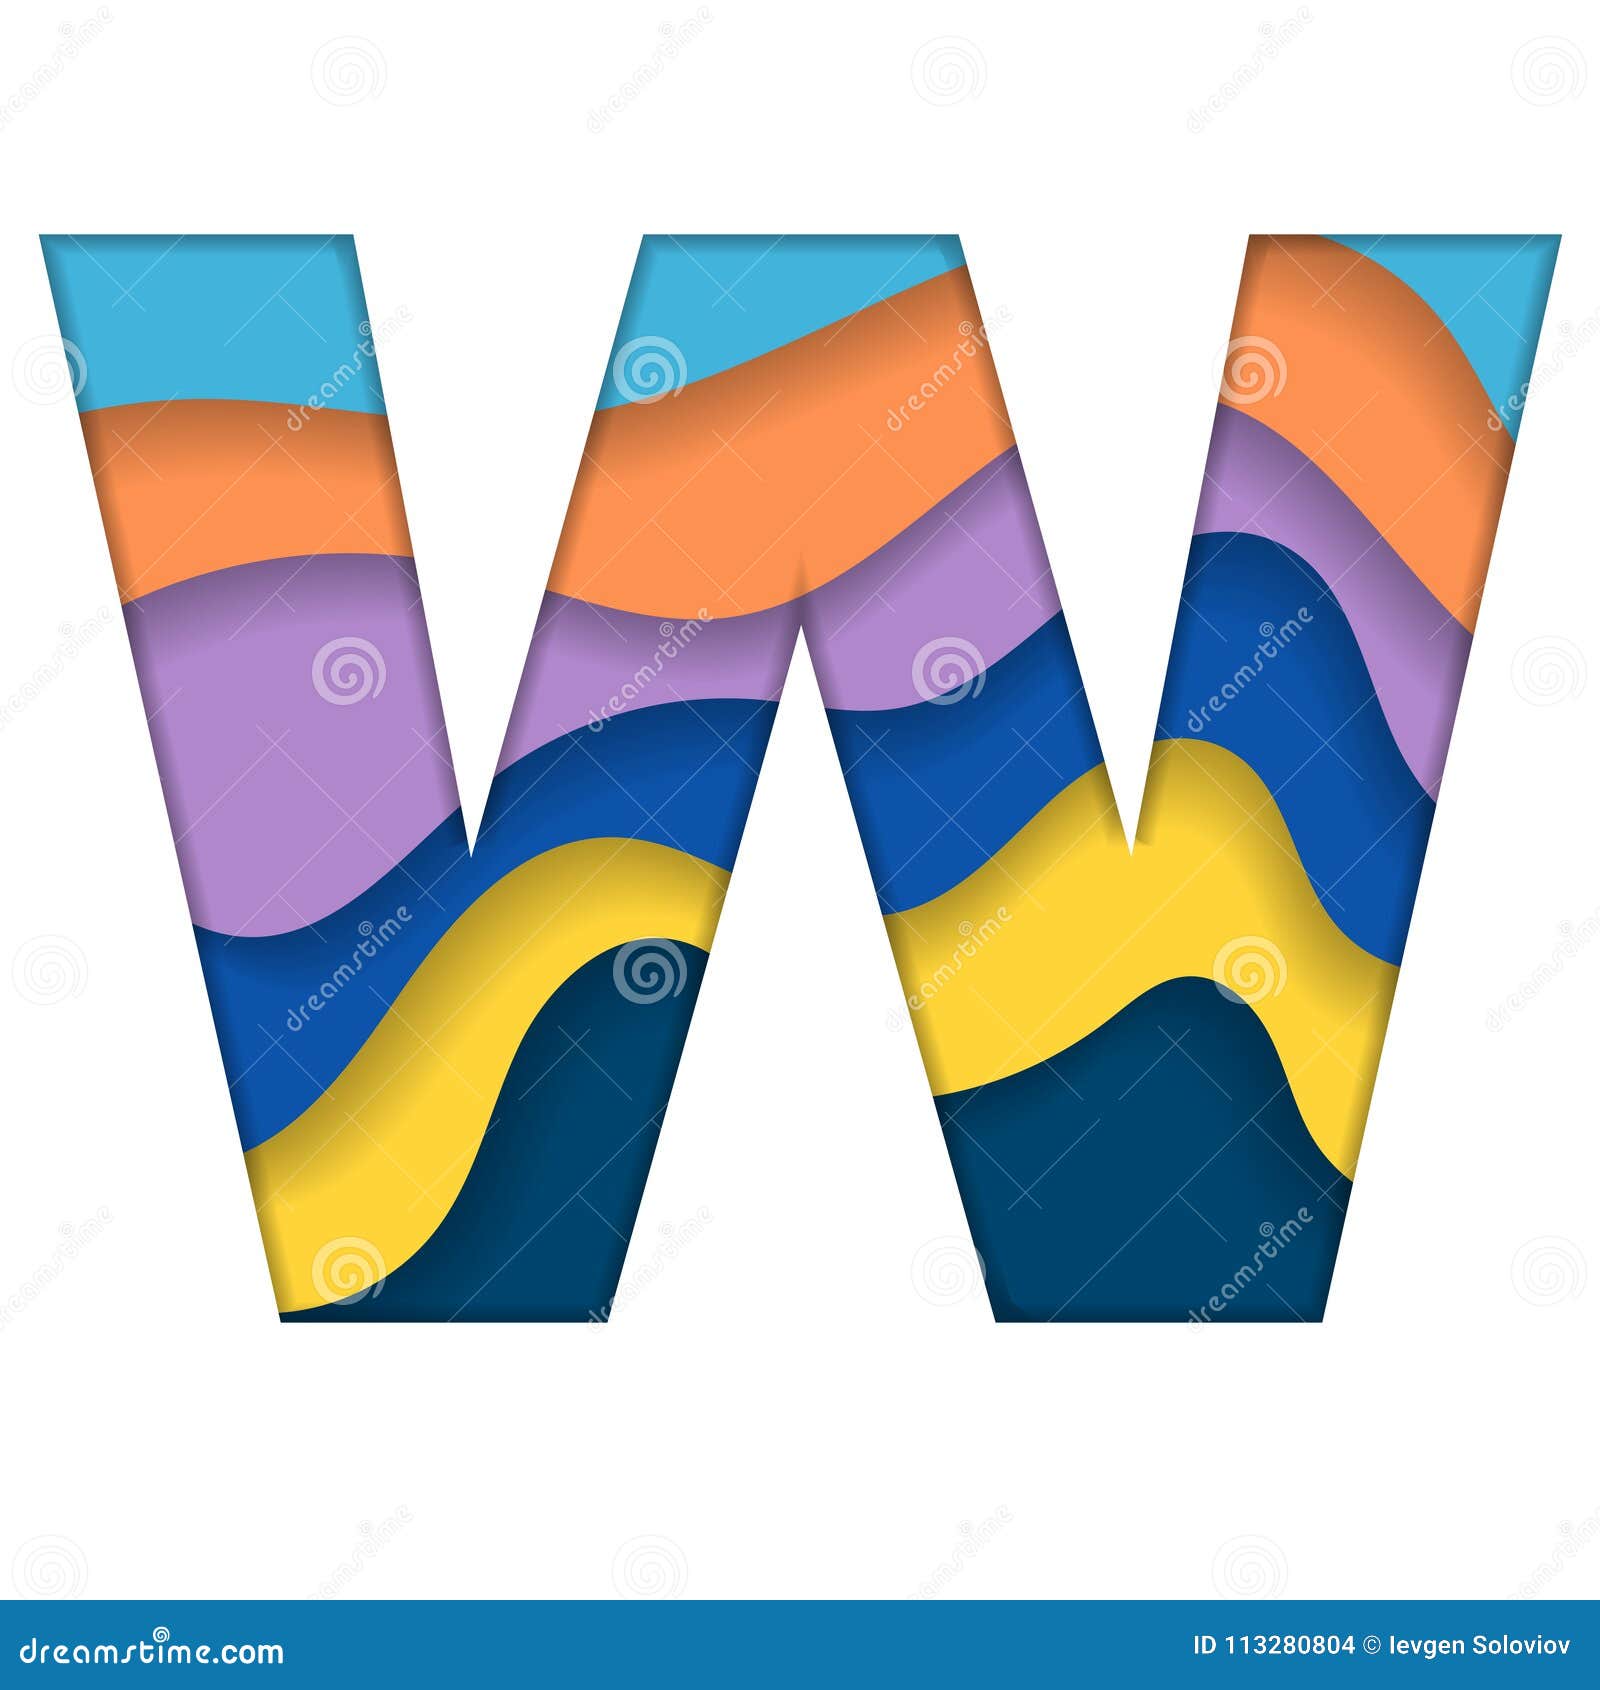 Colors with w